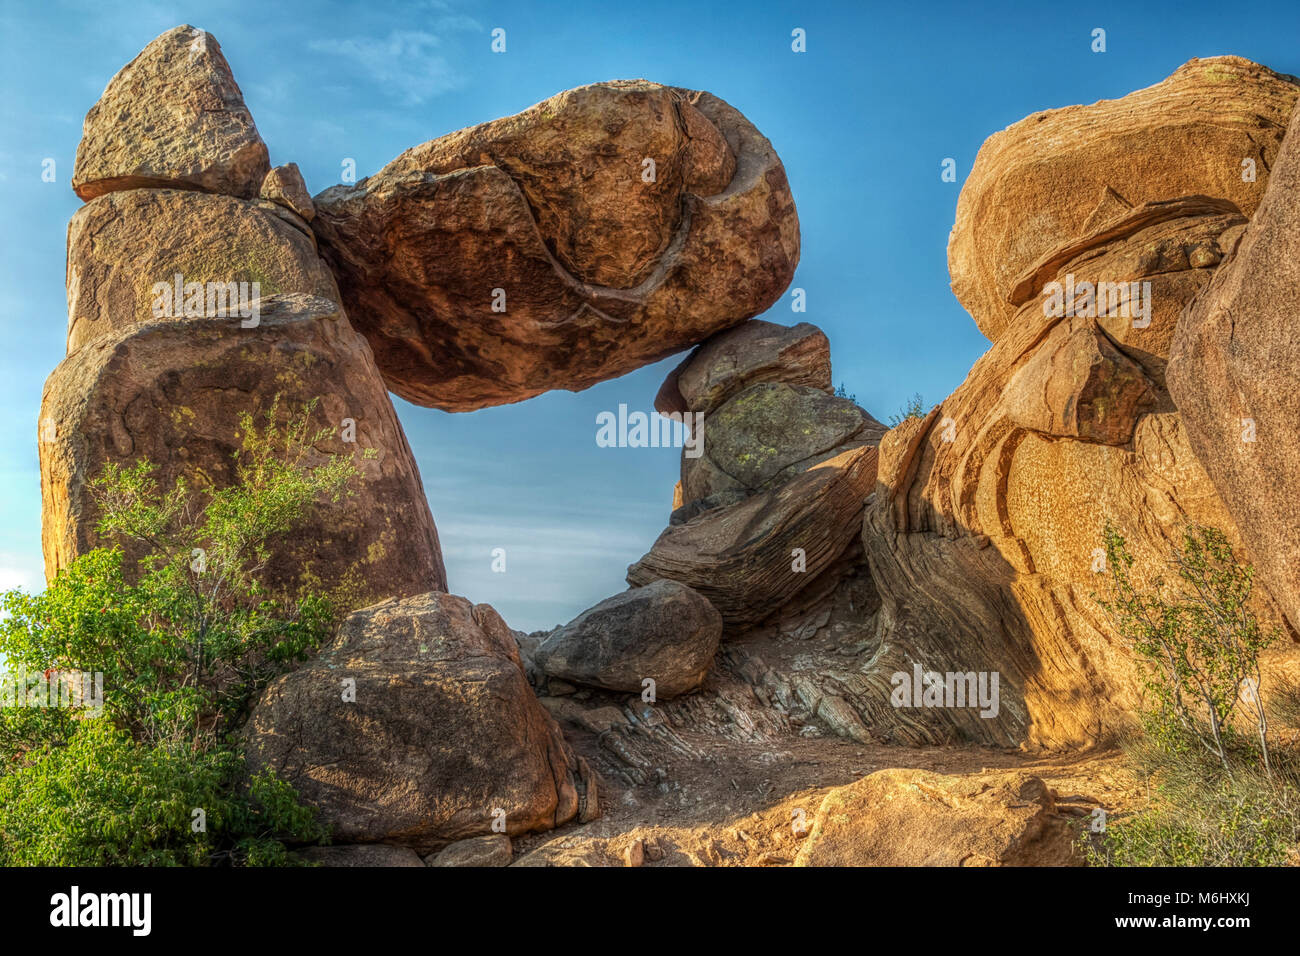 Balancing rock, eroded igneous rock (remains of a laccolith), Grapevine Hills, Big Bend National Park, Texas, USA. Stock Photo